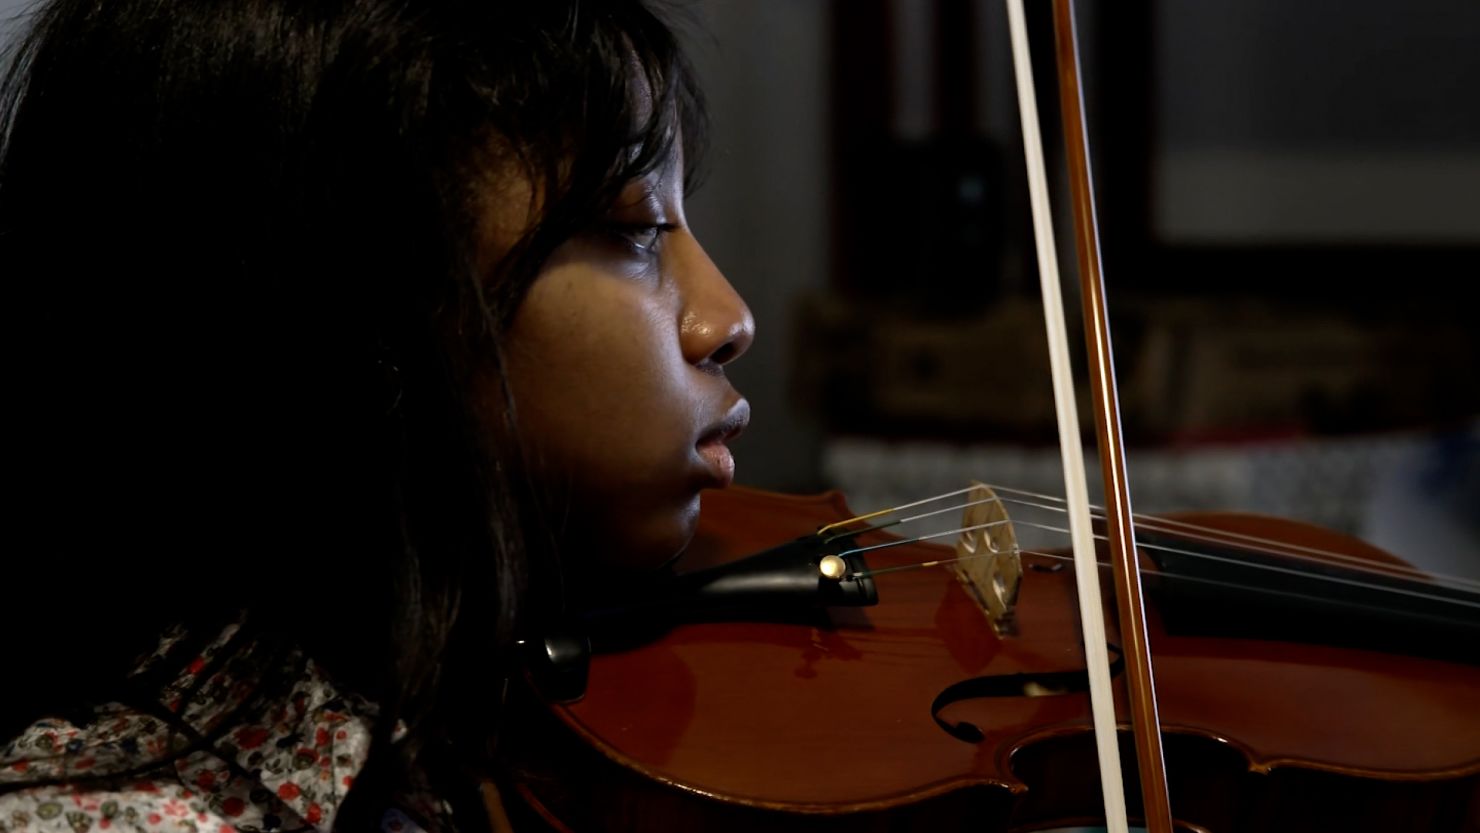 Over the last 30 years, the Atlanta Symphony Orchestra Talent Development Program has mentored more than 100 young Black, African American and Latino musicians.